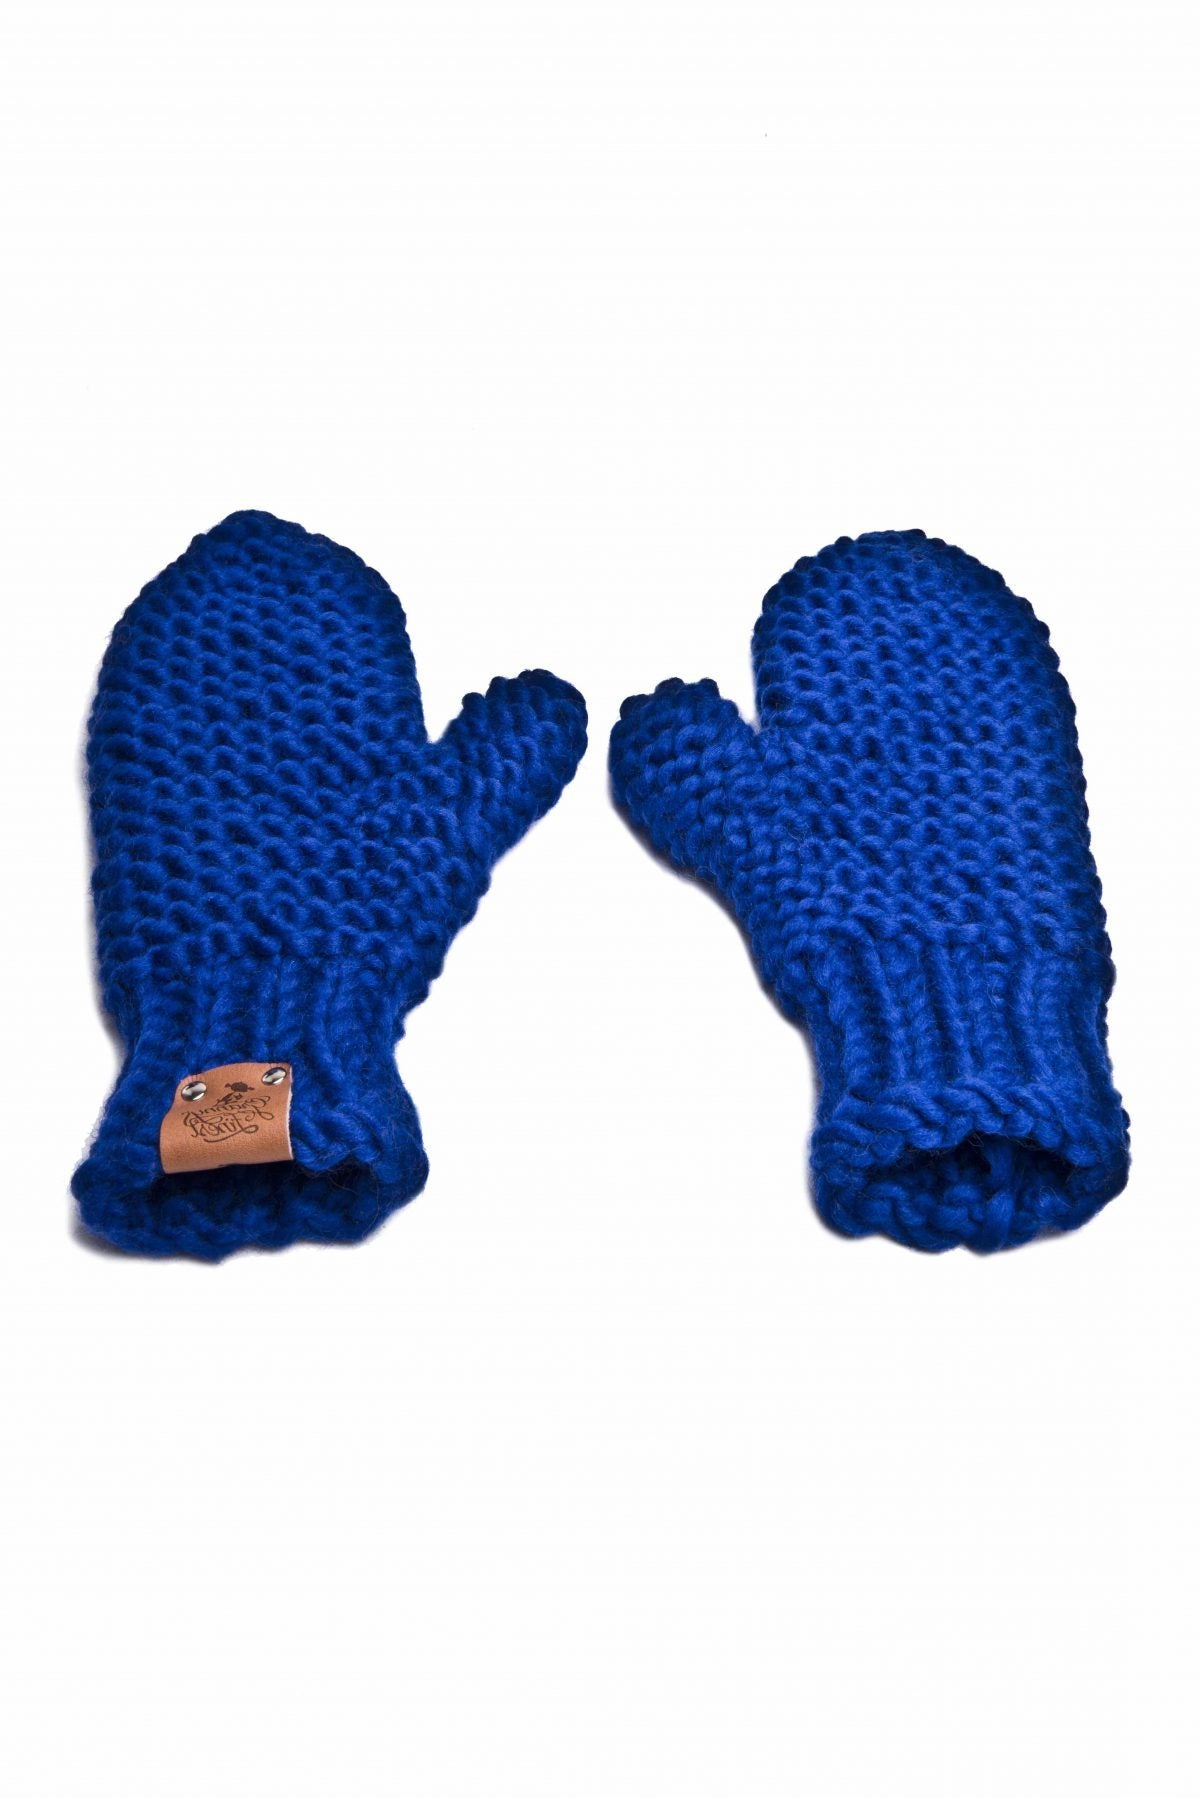 Handwarmers Carla by Granny's Finest